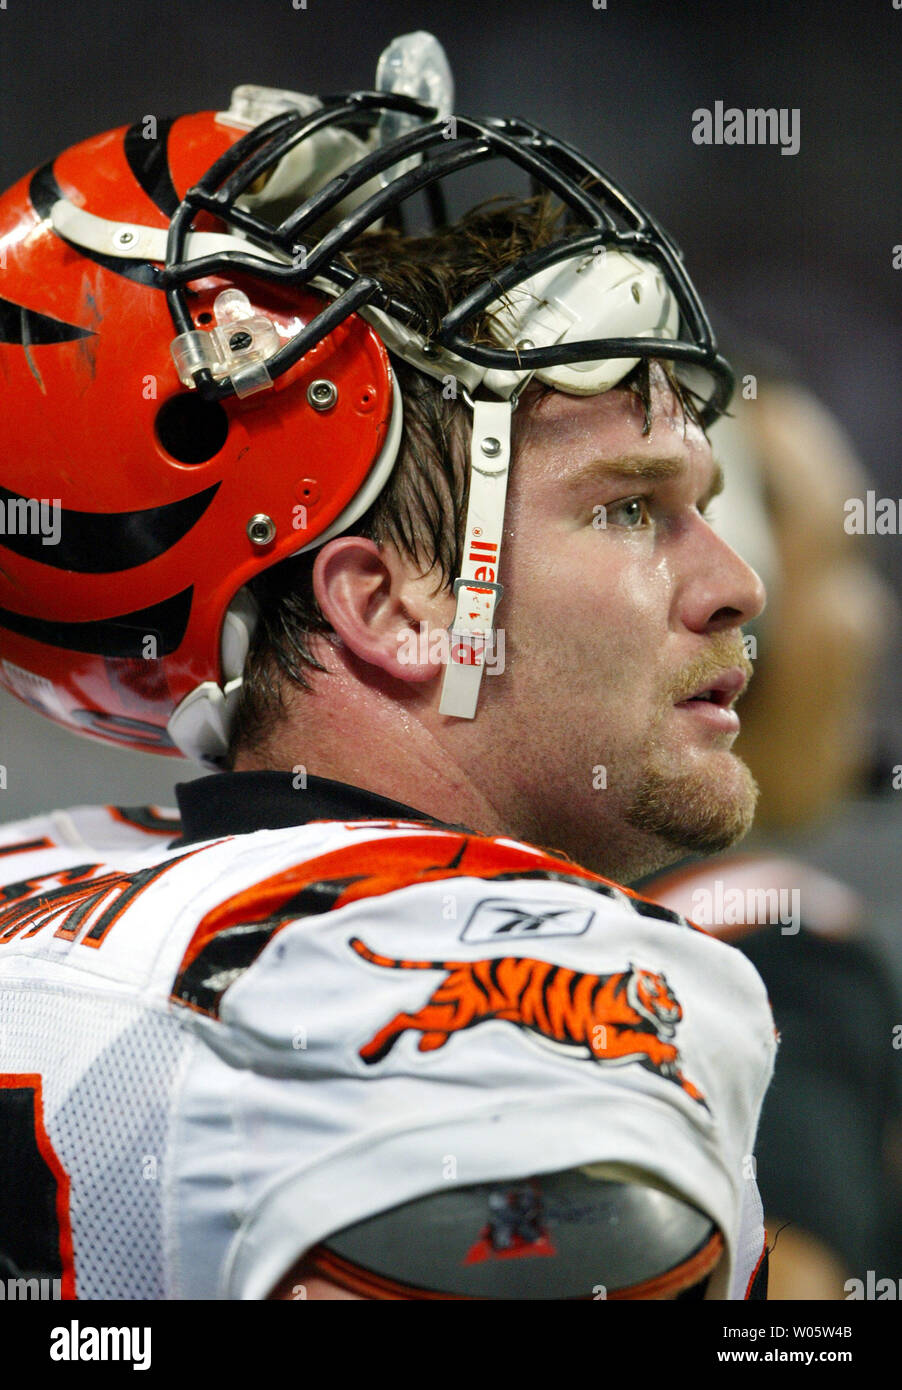 Former University of Missouri defensive end standout Cincinnati Bengals'  Justin Smith watches as the seconds tick away on the clock in the fourth  quarter against the St. Louis Rams at the Edward